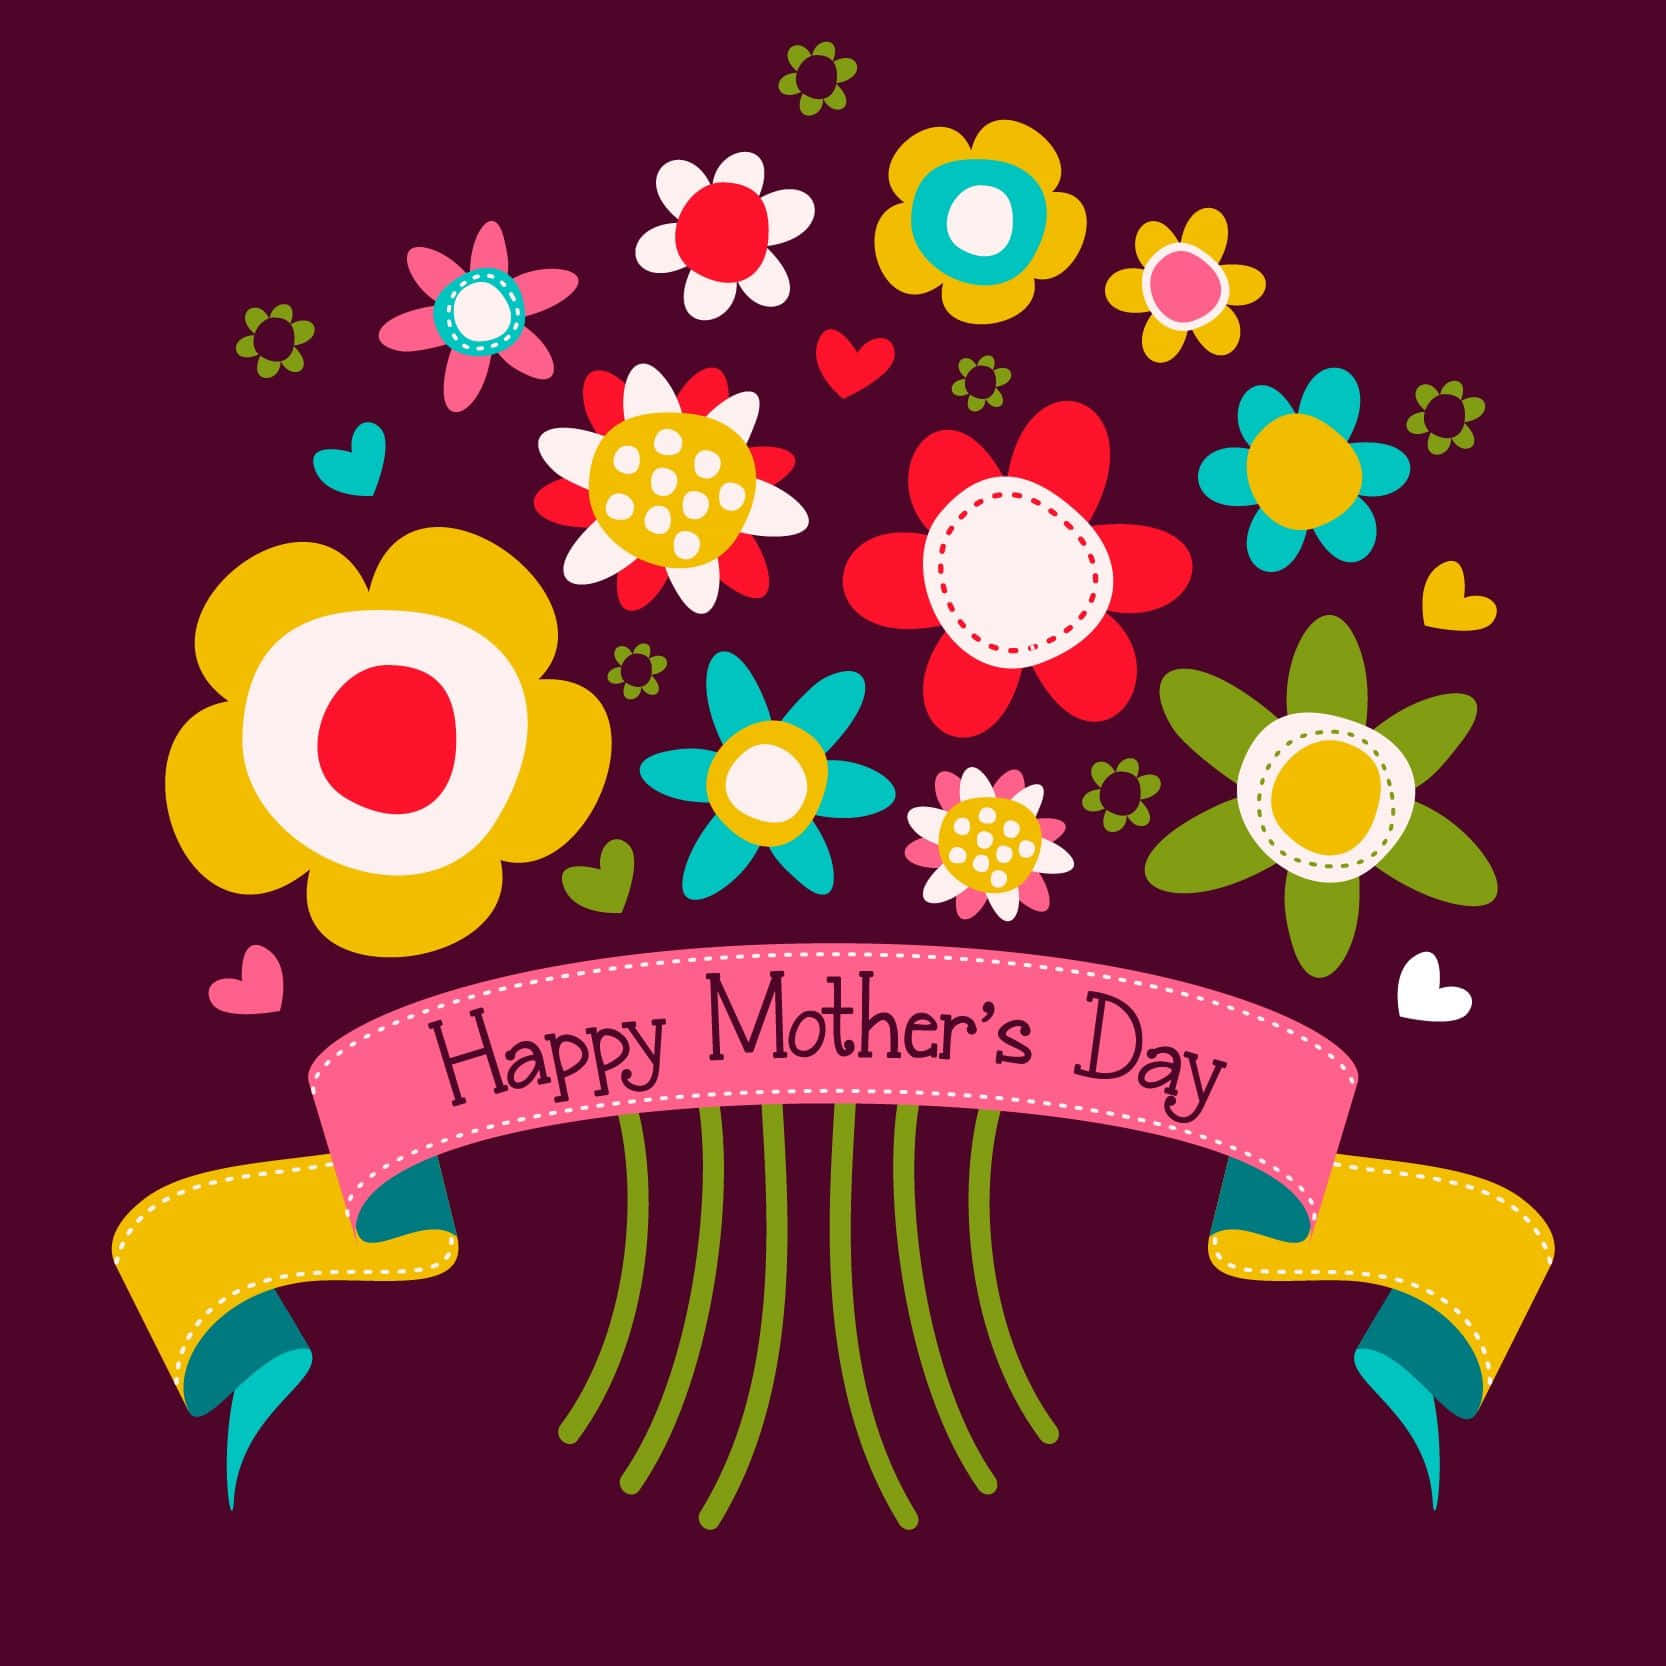 Download Happy Mother's Day Pictures 